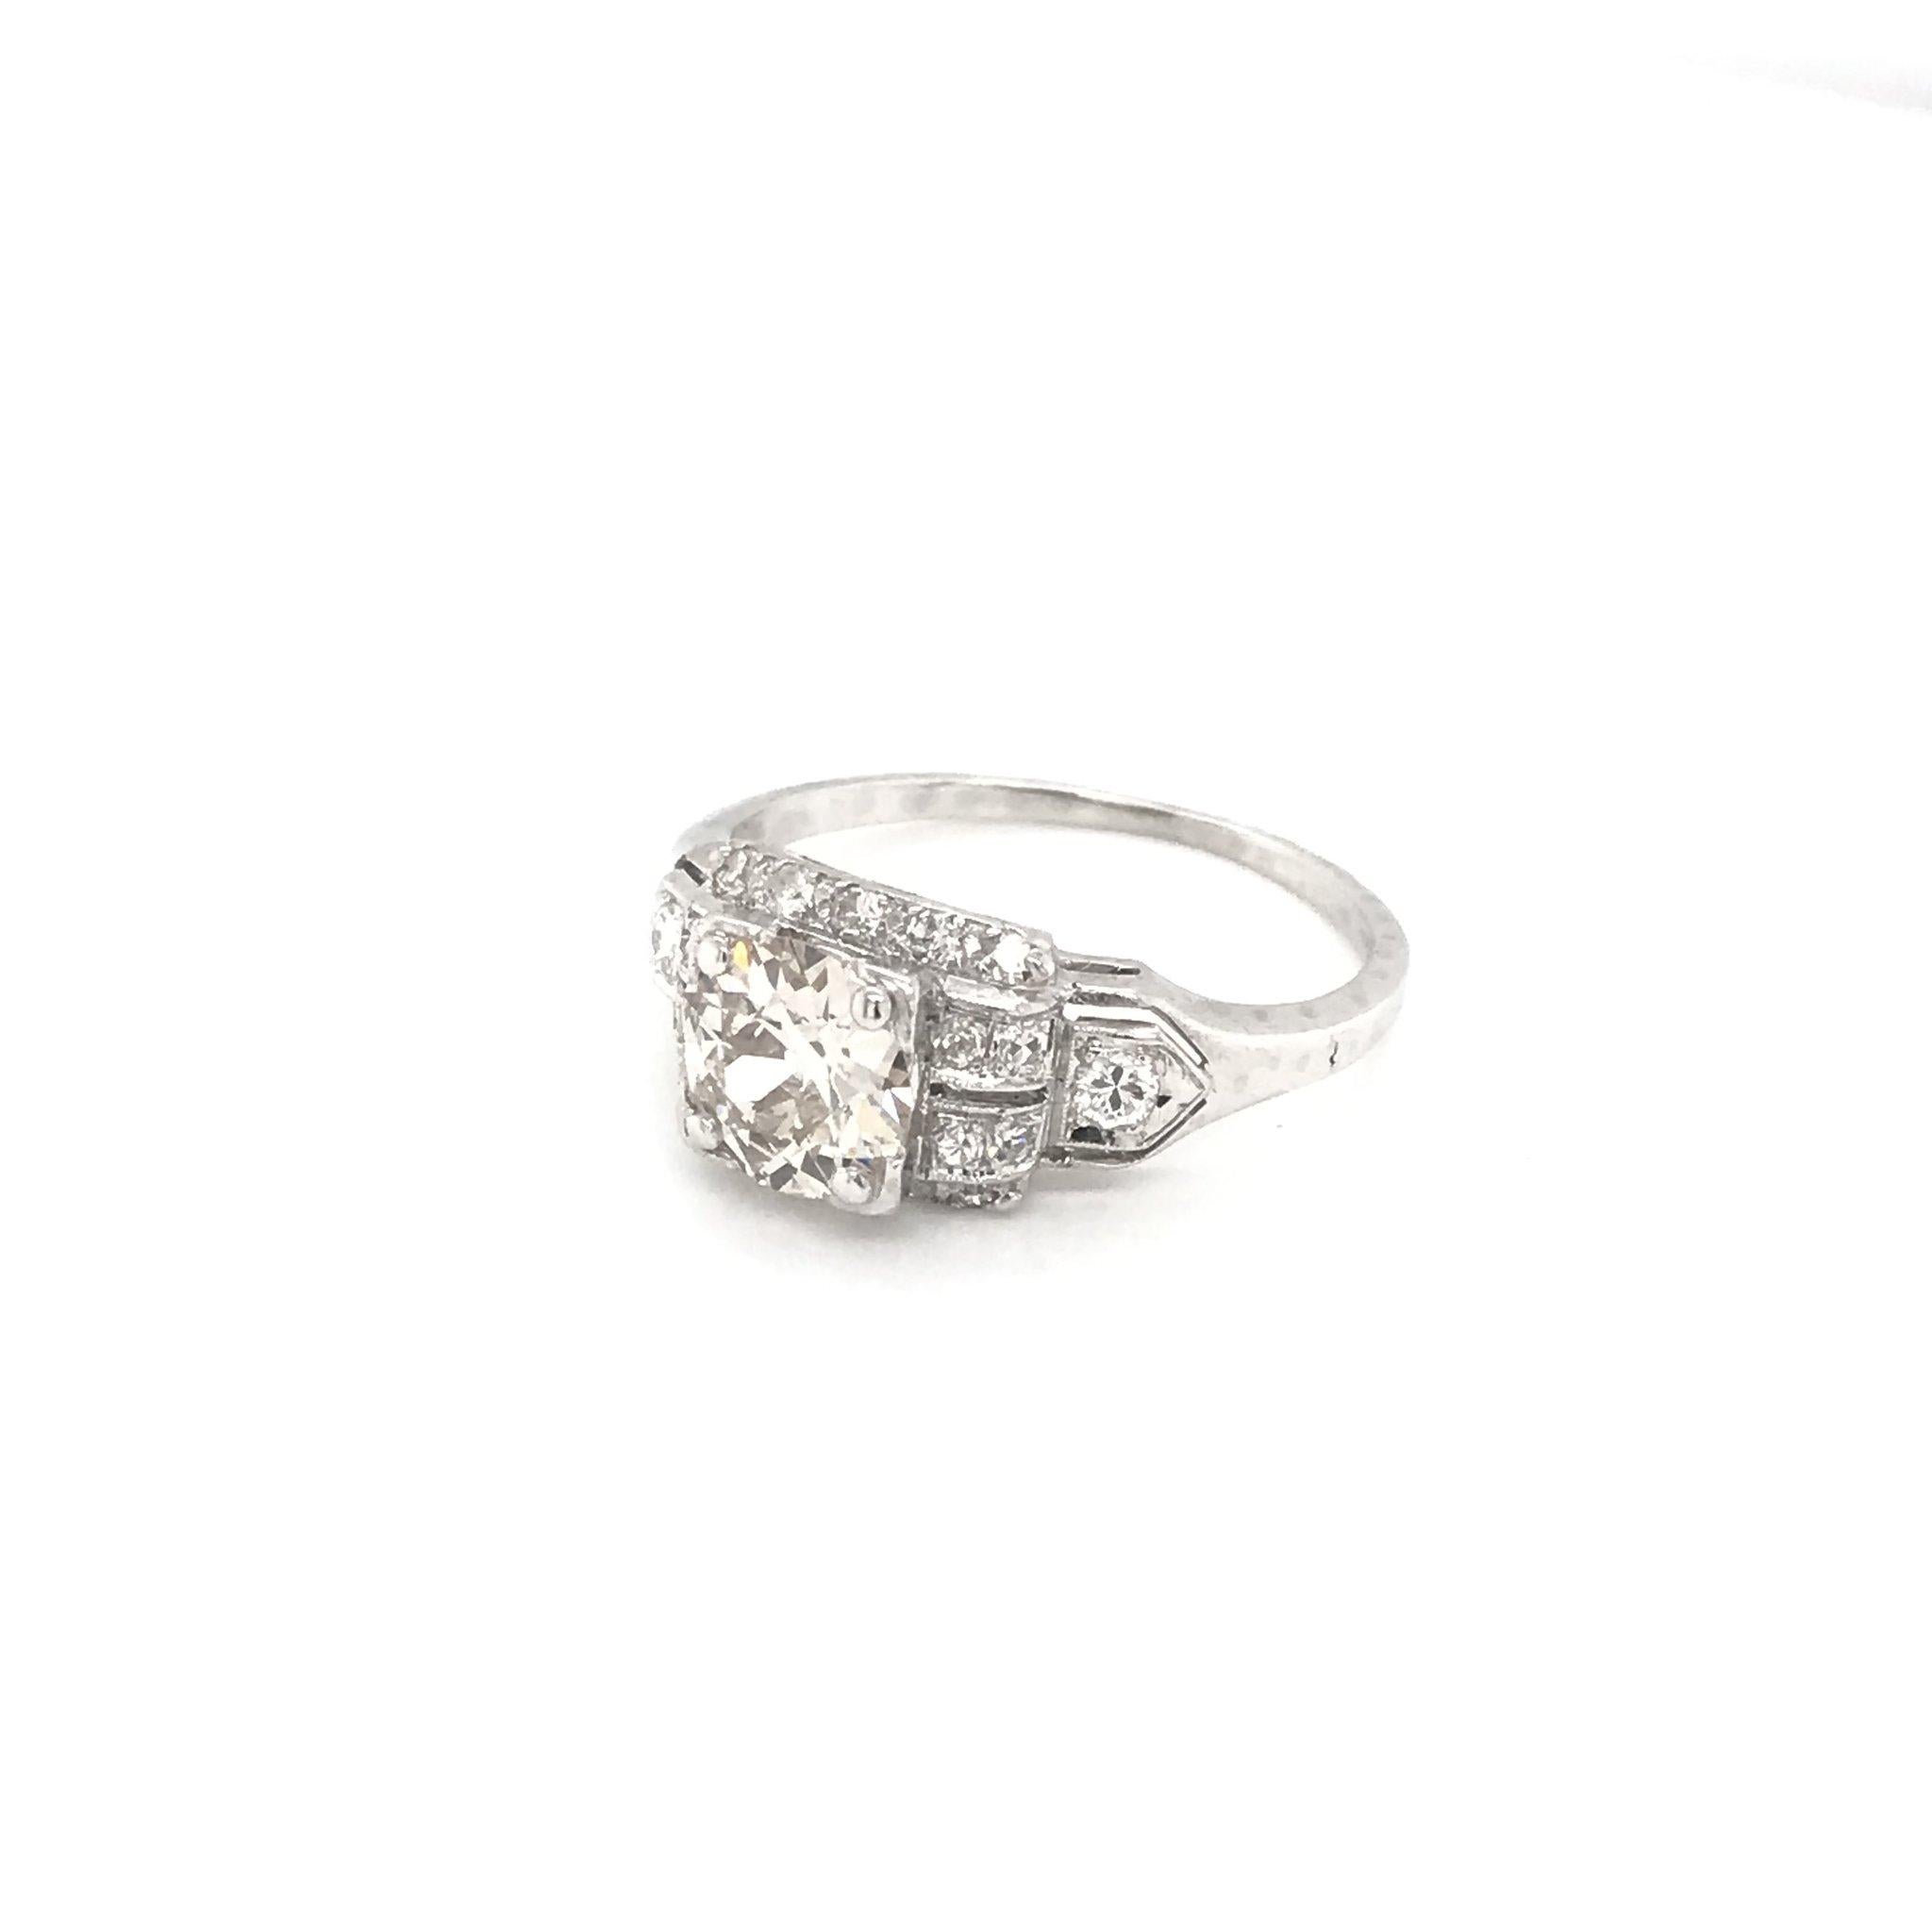 This beautiful antique piece was handcrafted sometime during the Art Deco design period ( 1920-1940 ). The platinum setting features a sparkling center diamond that measures approximately 1.10 carats. The center diamond is an Old European cut and